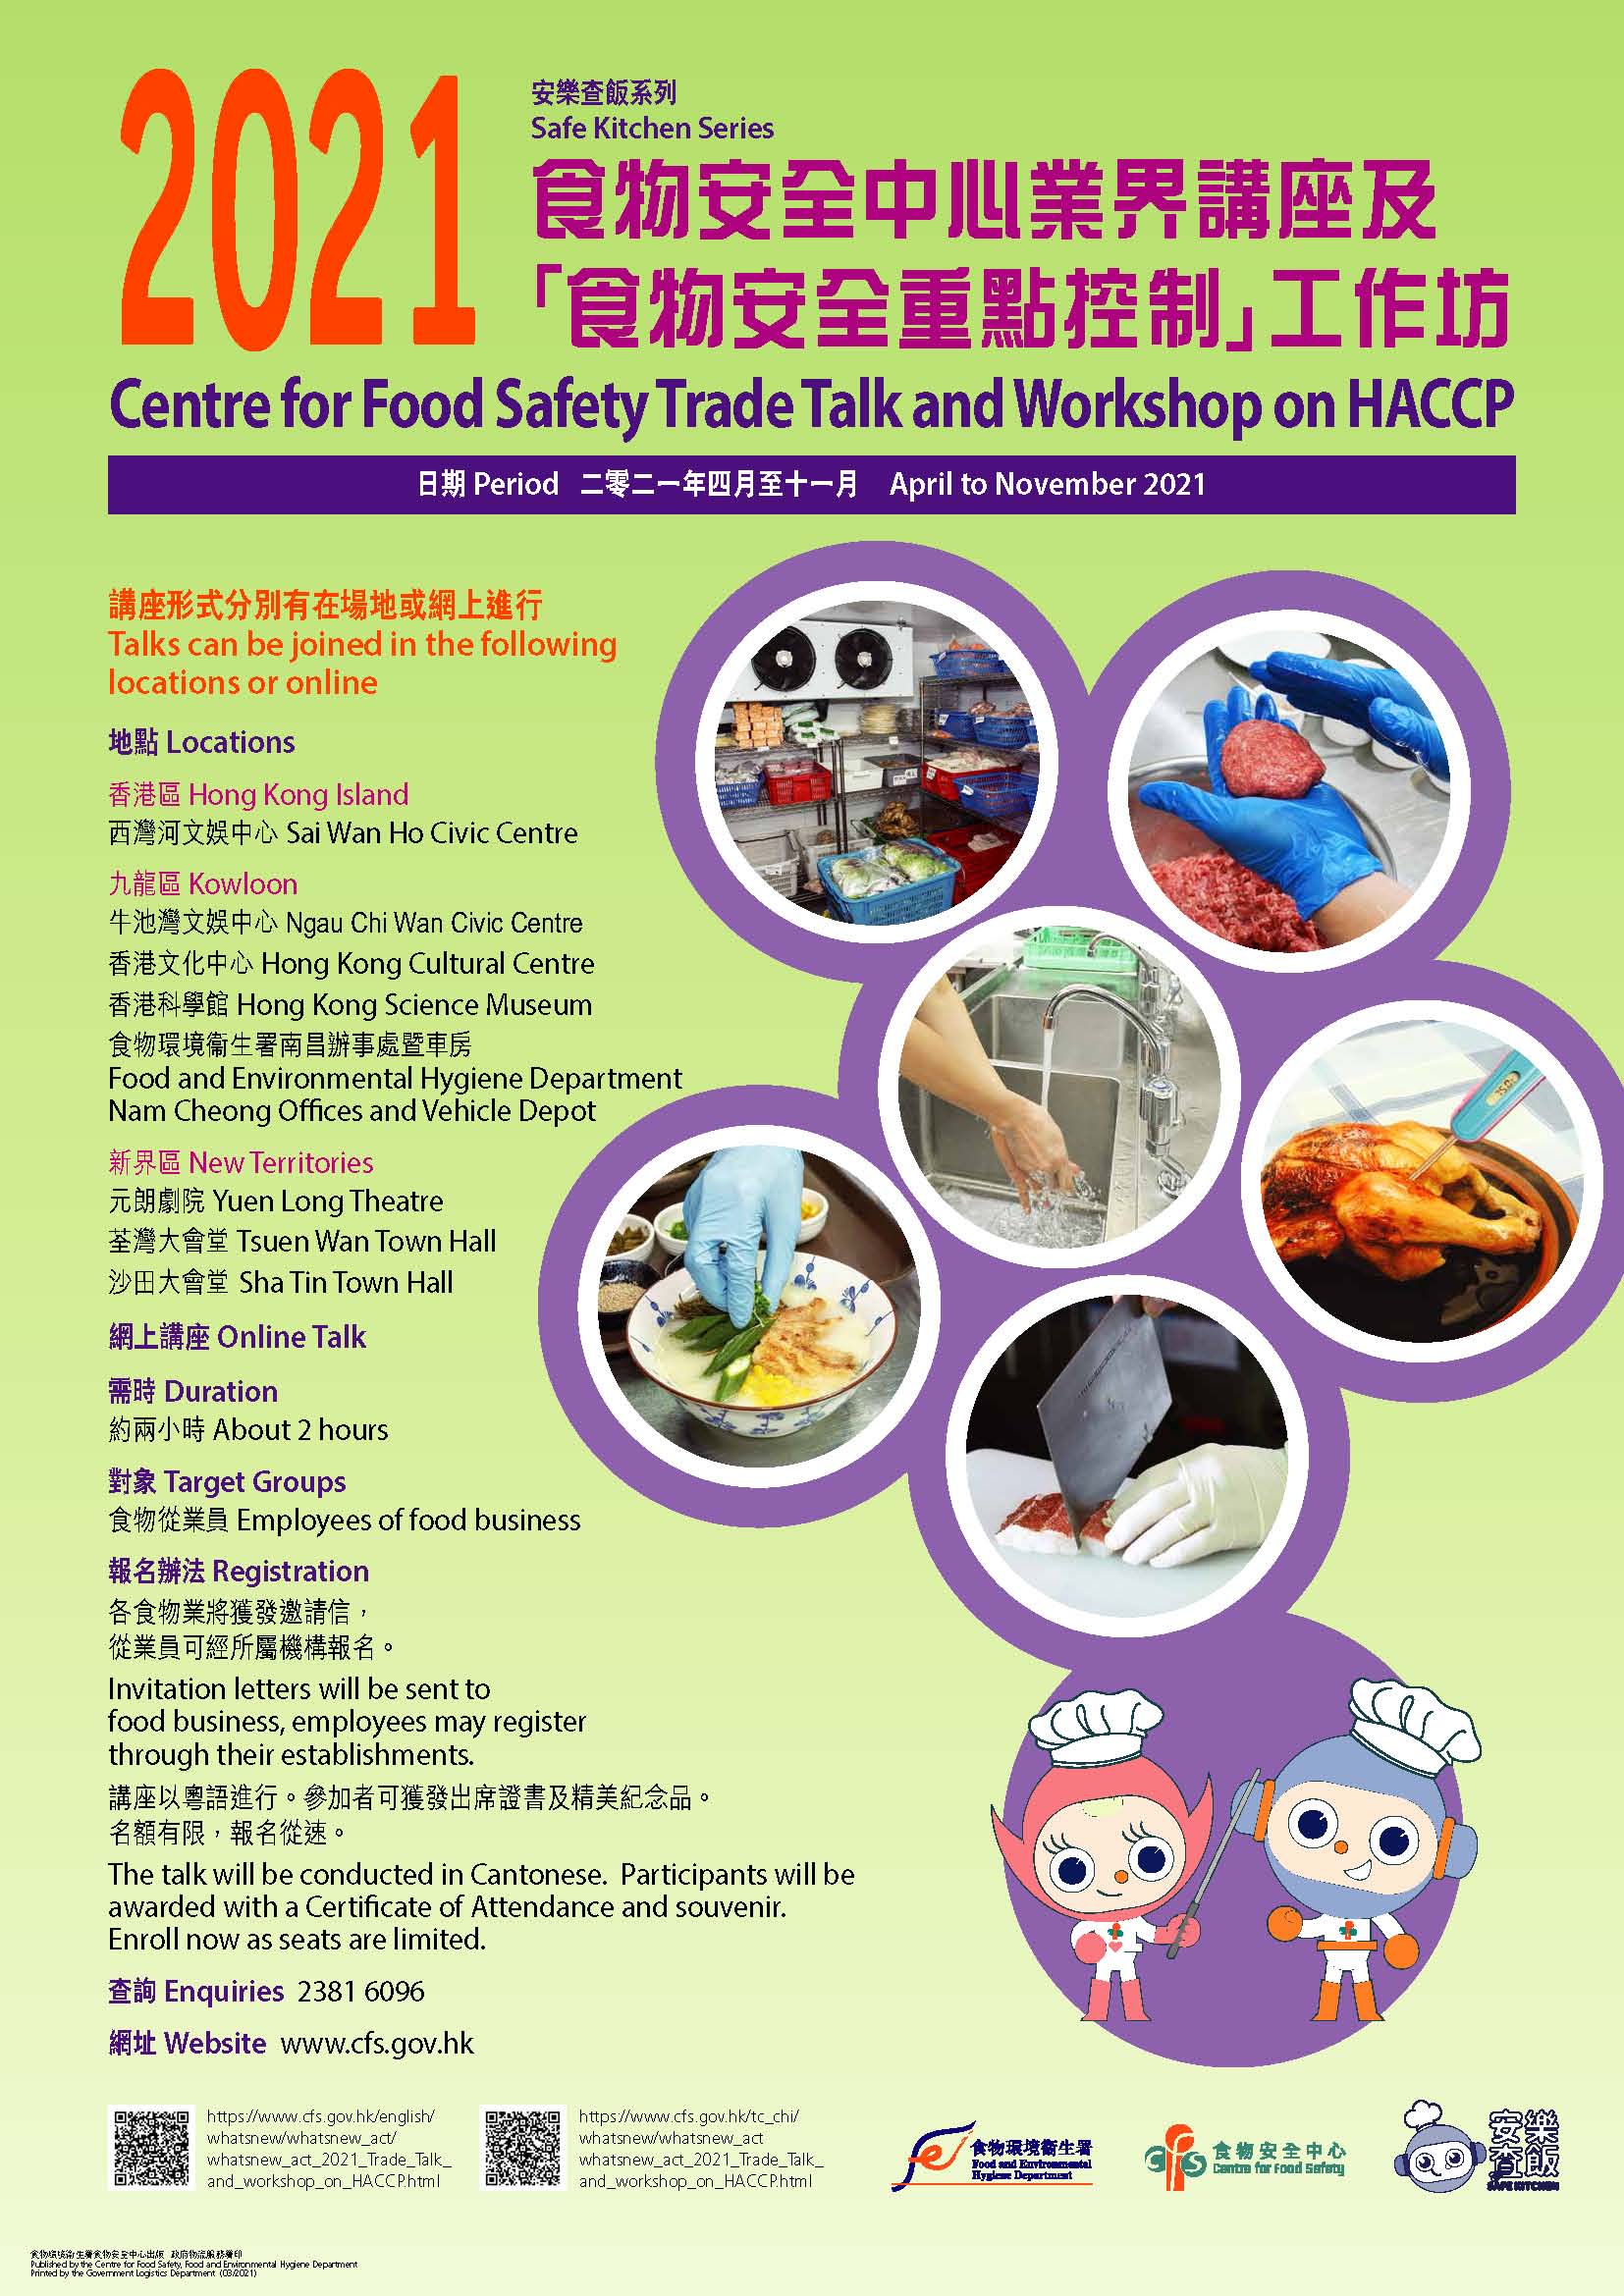 2021 Trade Talk and workshop on HACCP